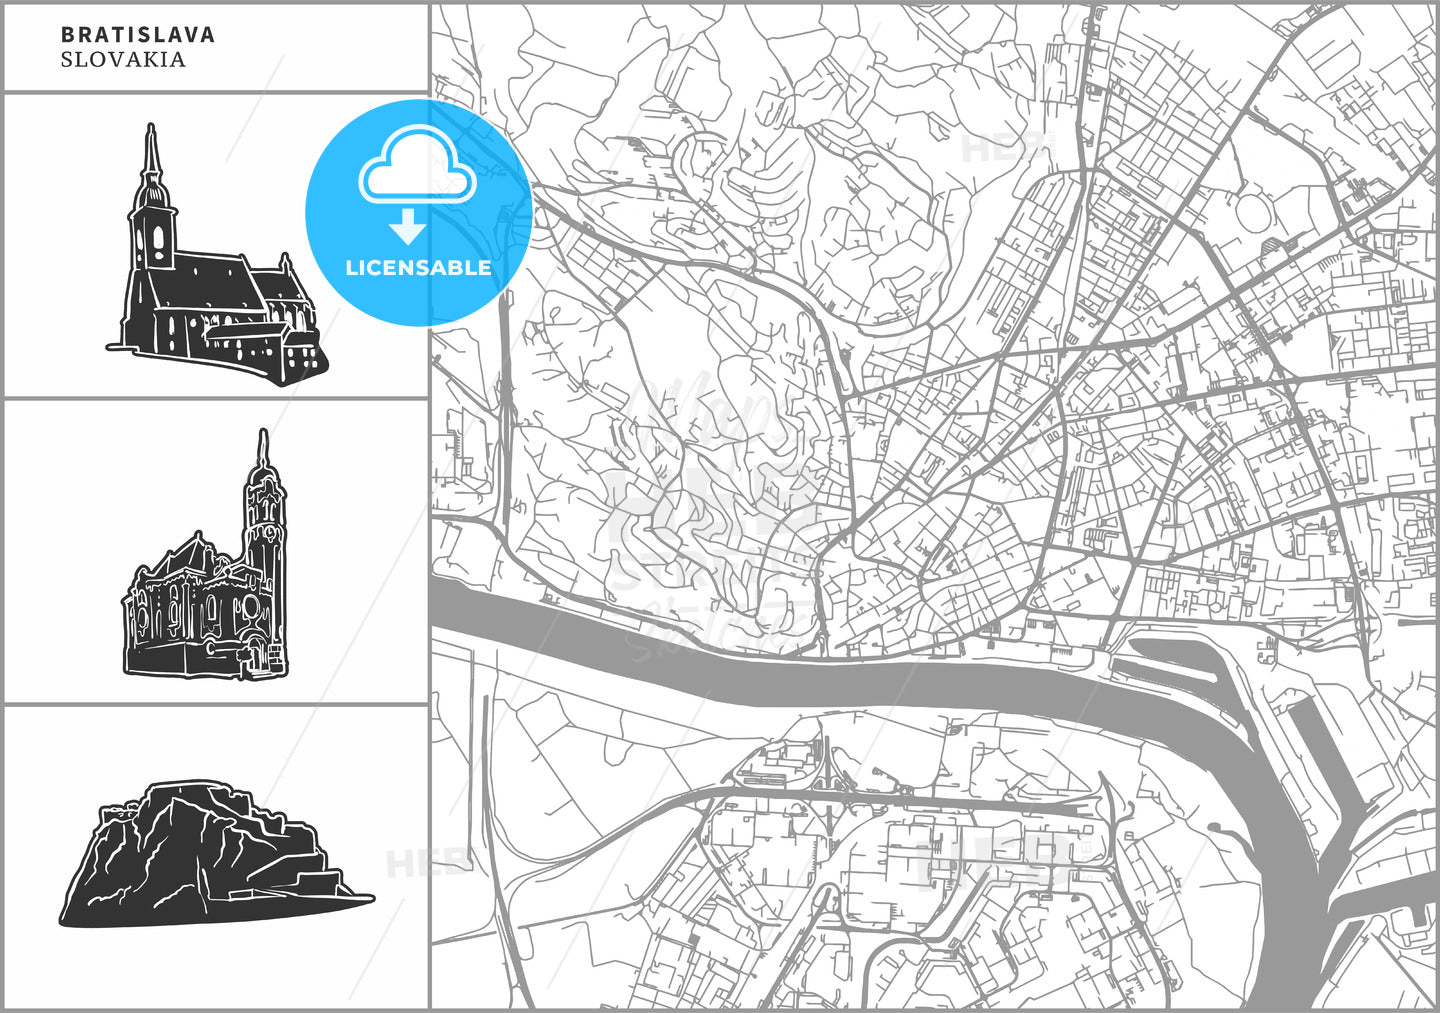 Bratislava city map with hand-drawn architecture icons